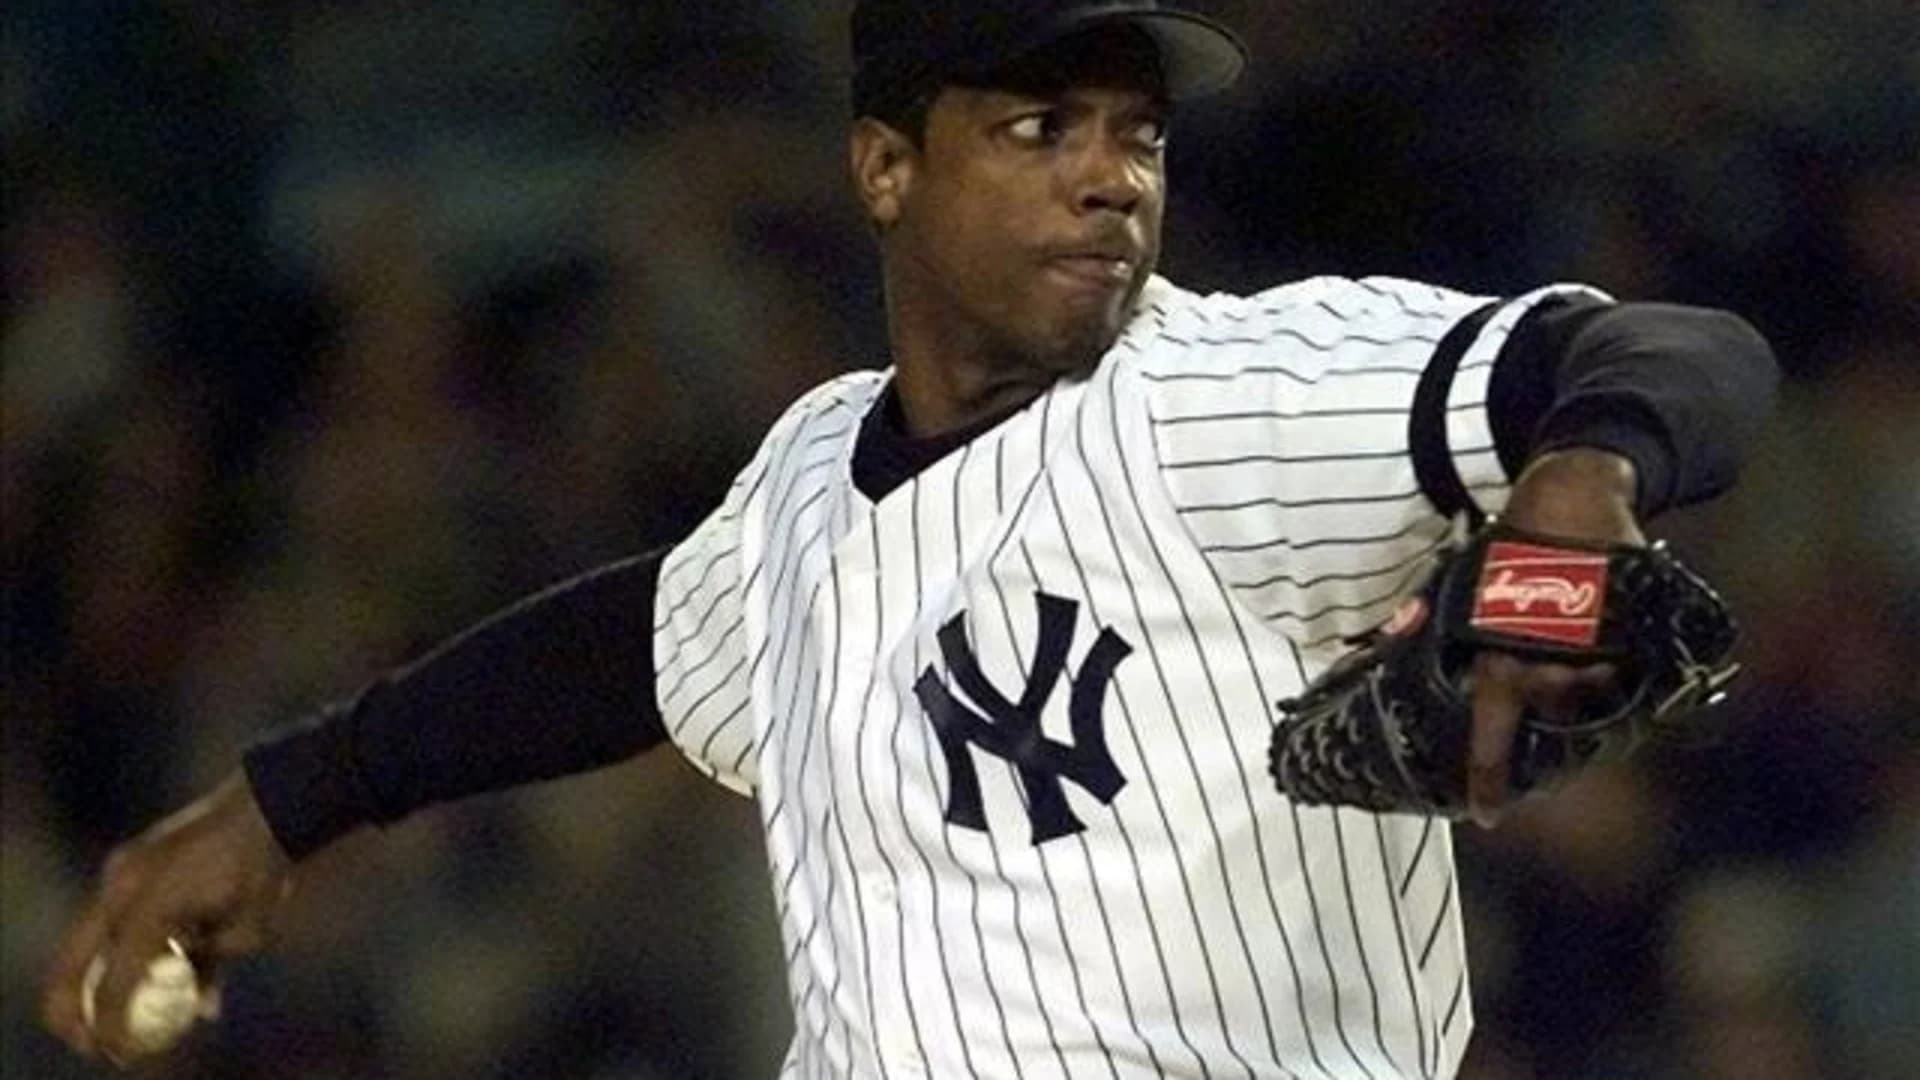 Former Mets, Yankees player Dwight Gooden faces drug, DUI charges